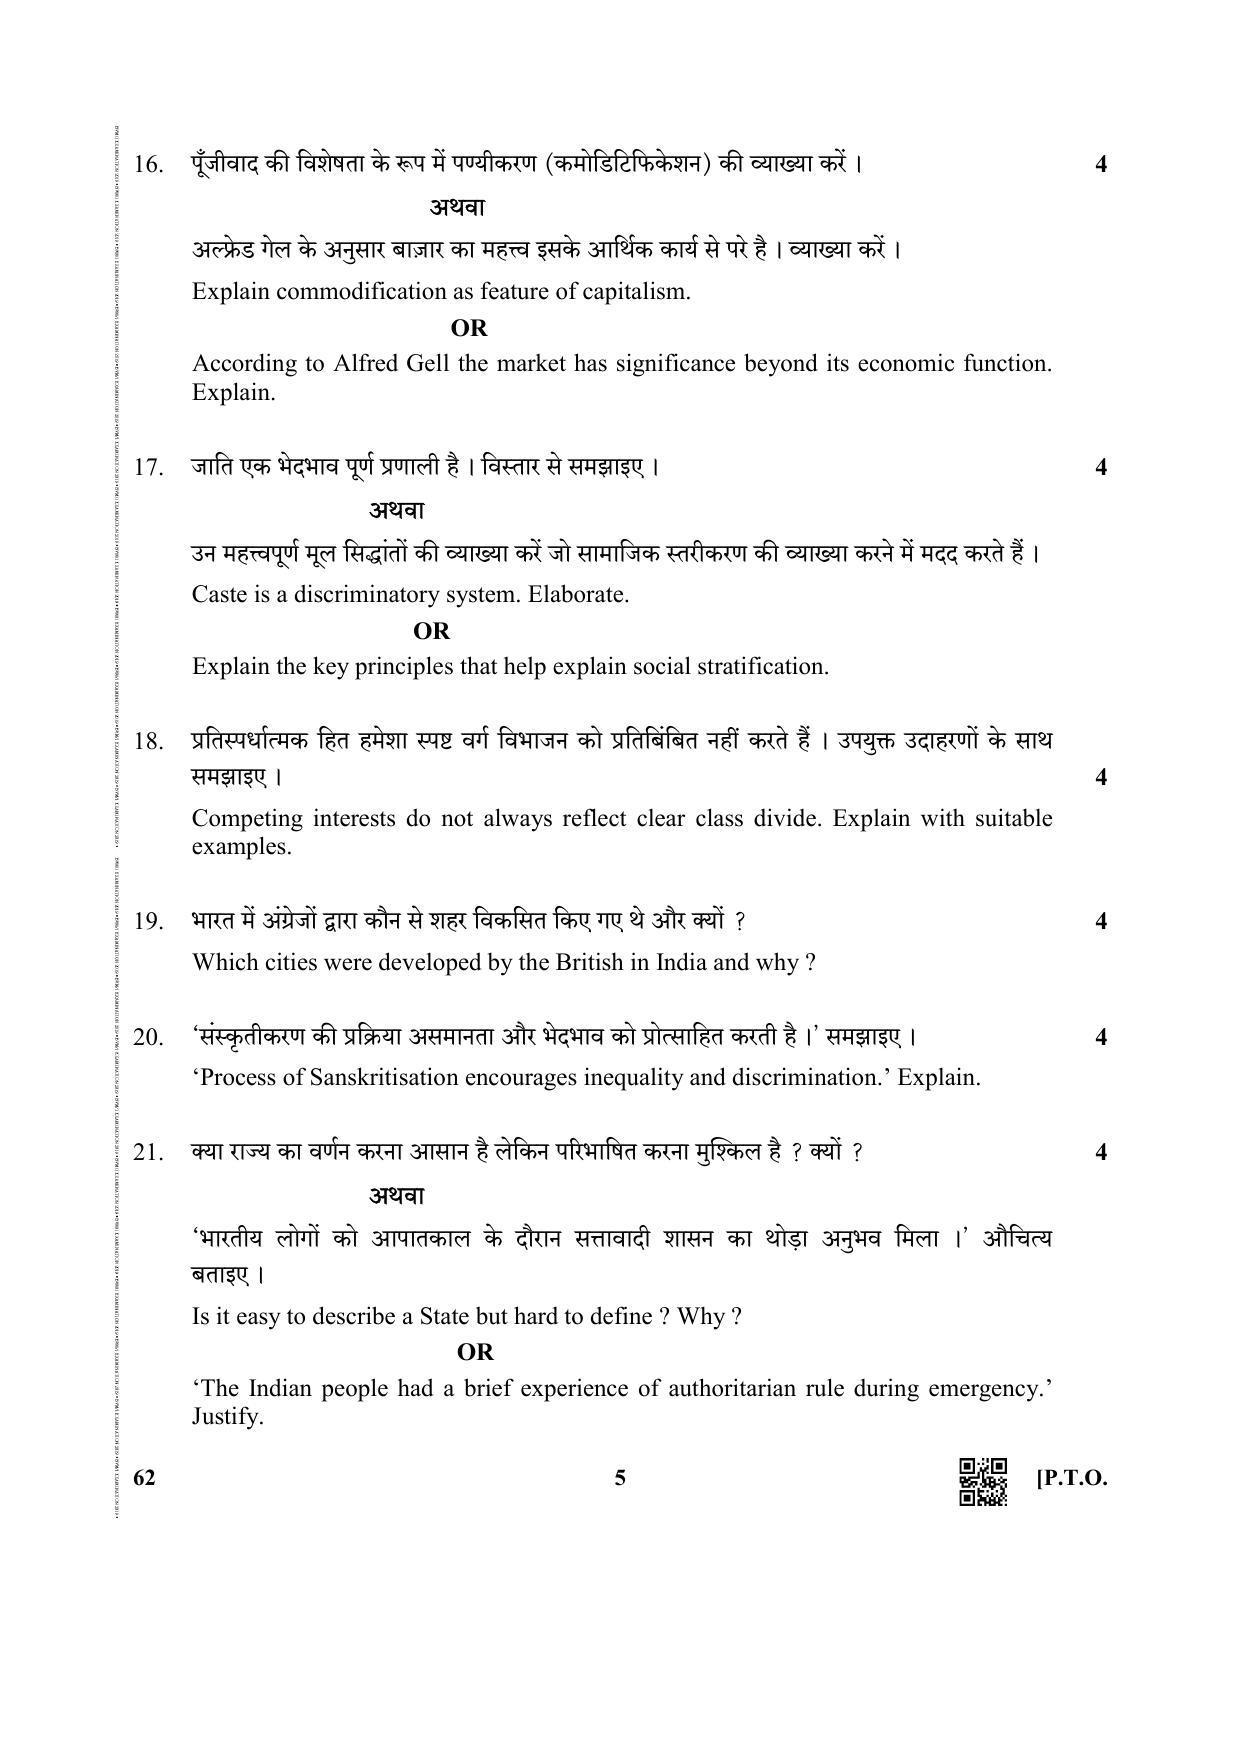 CBSE Class 12 62 (Sociology) 2019 Question Paper - Page 5